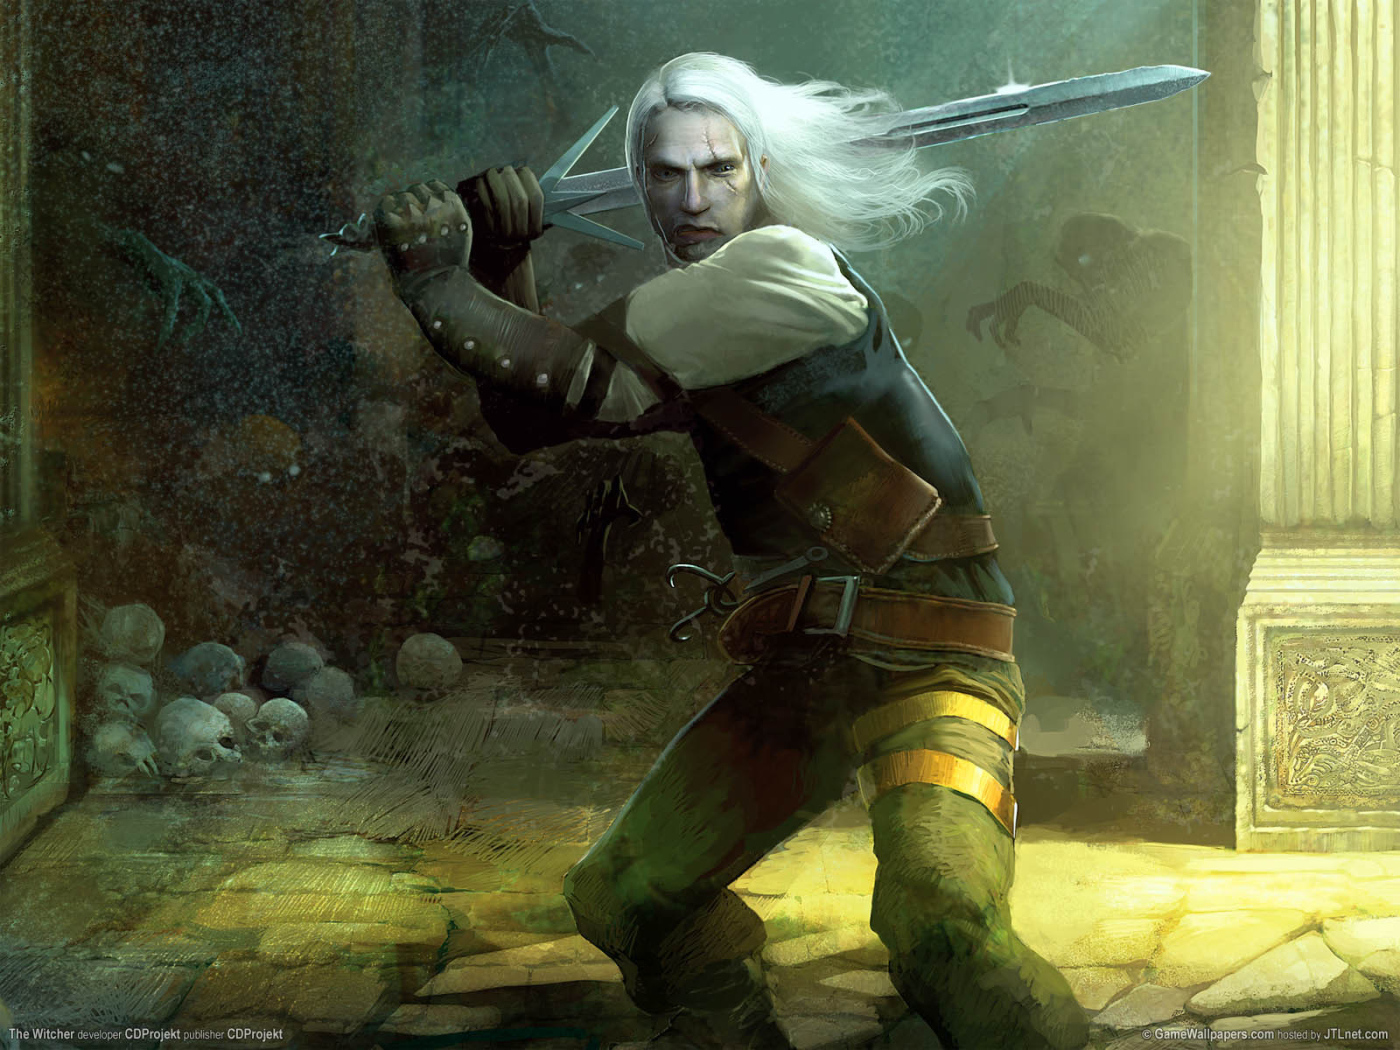 The hero of the game The Witcher sword